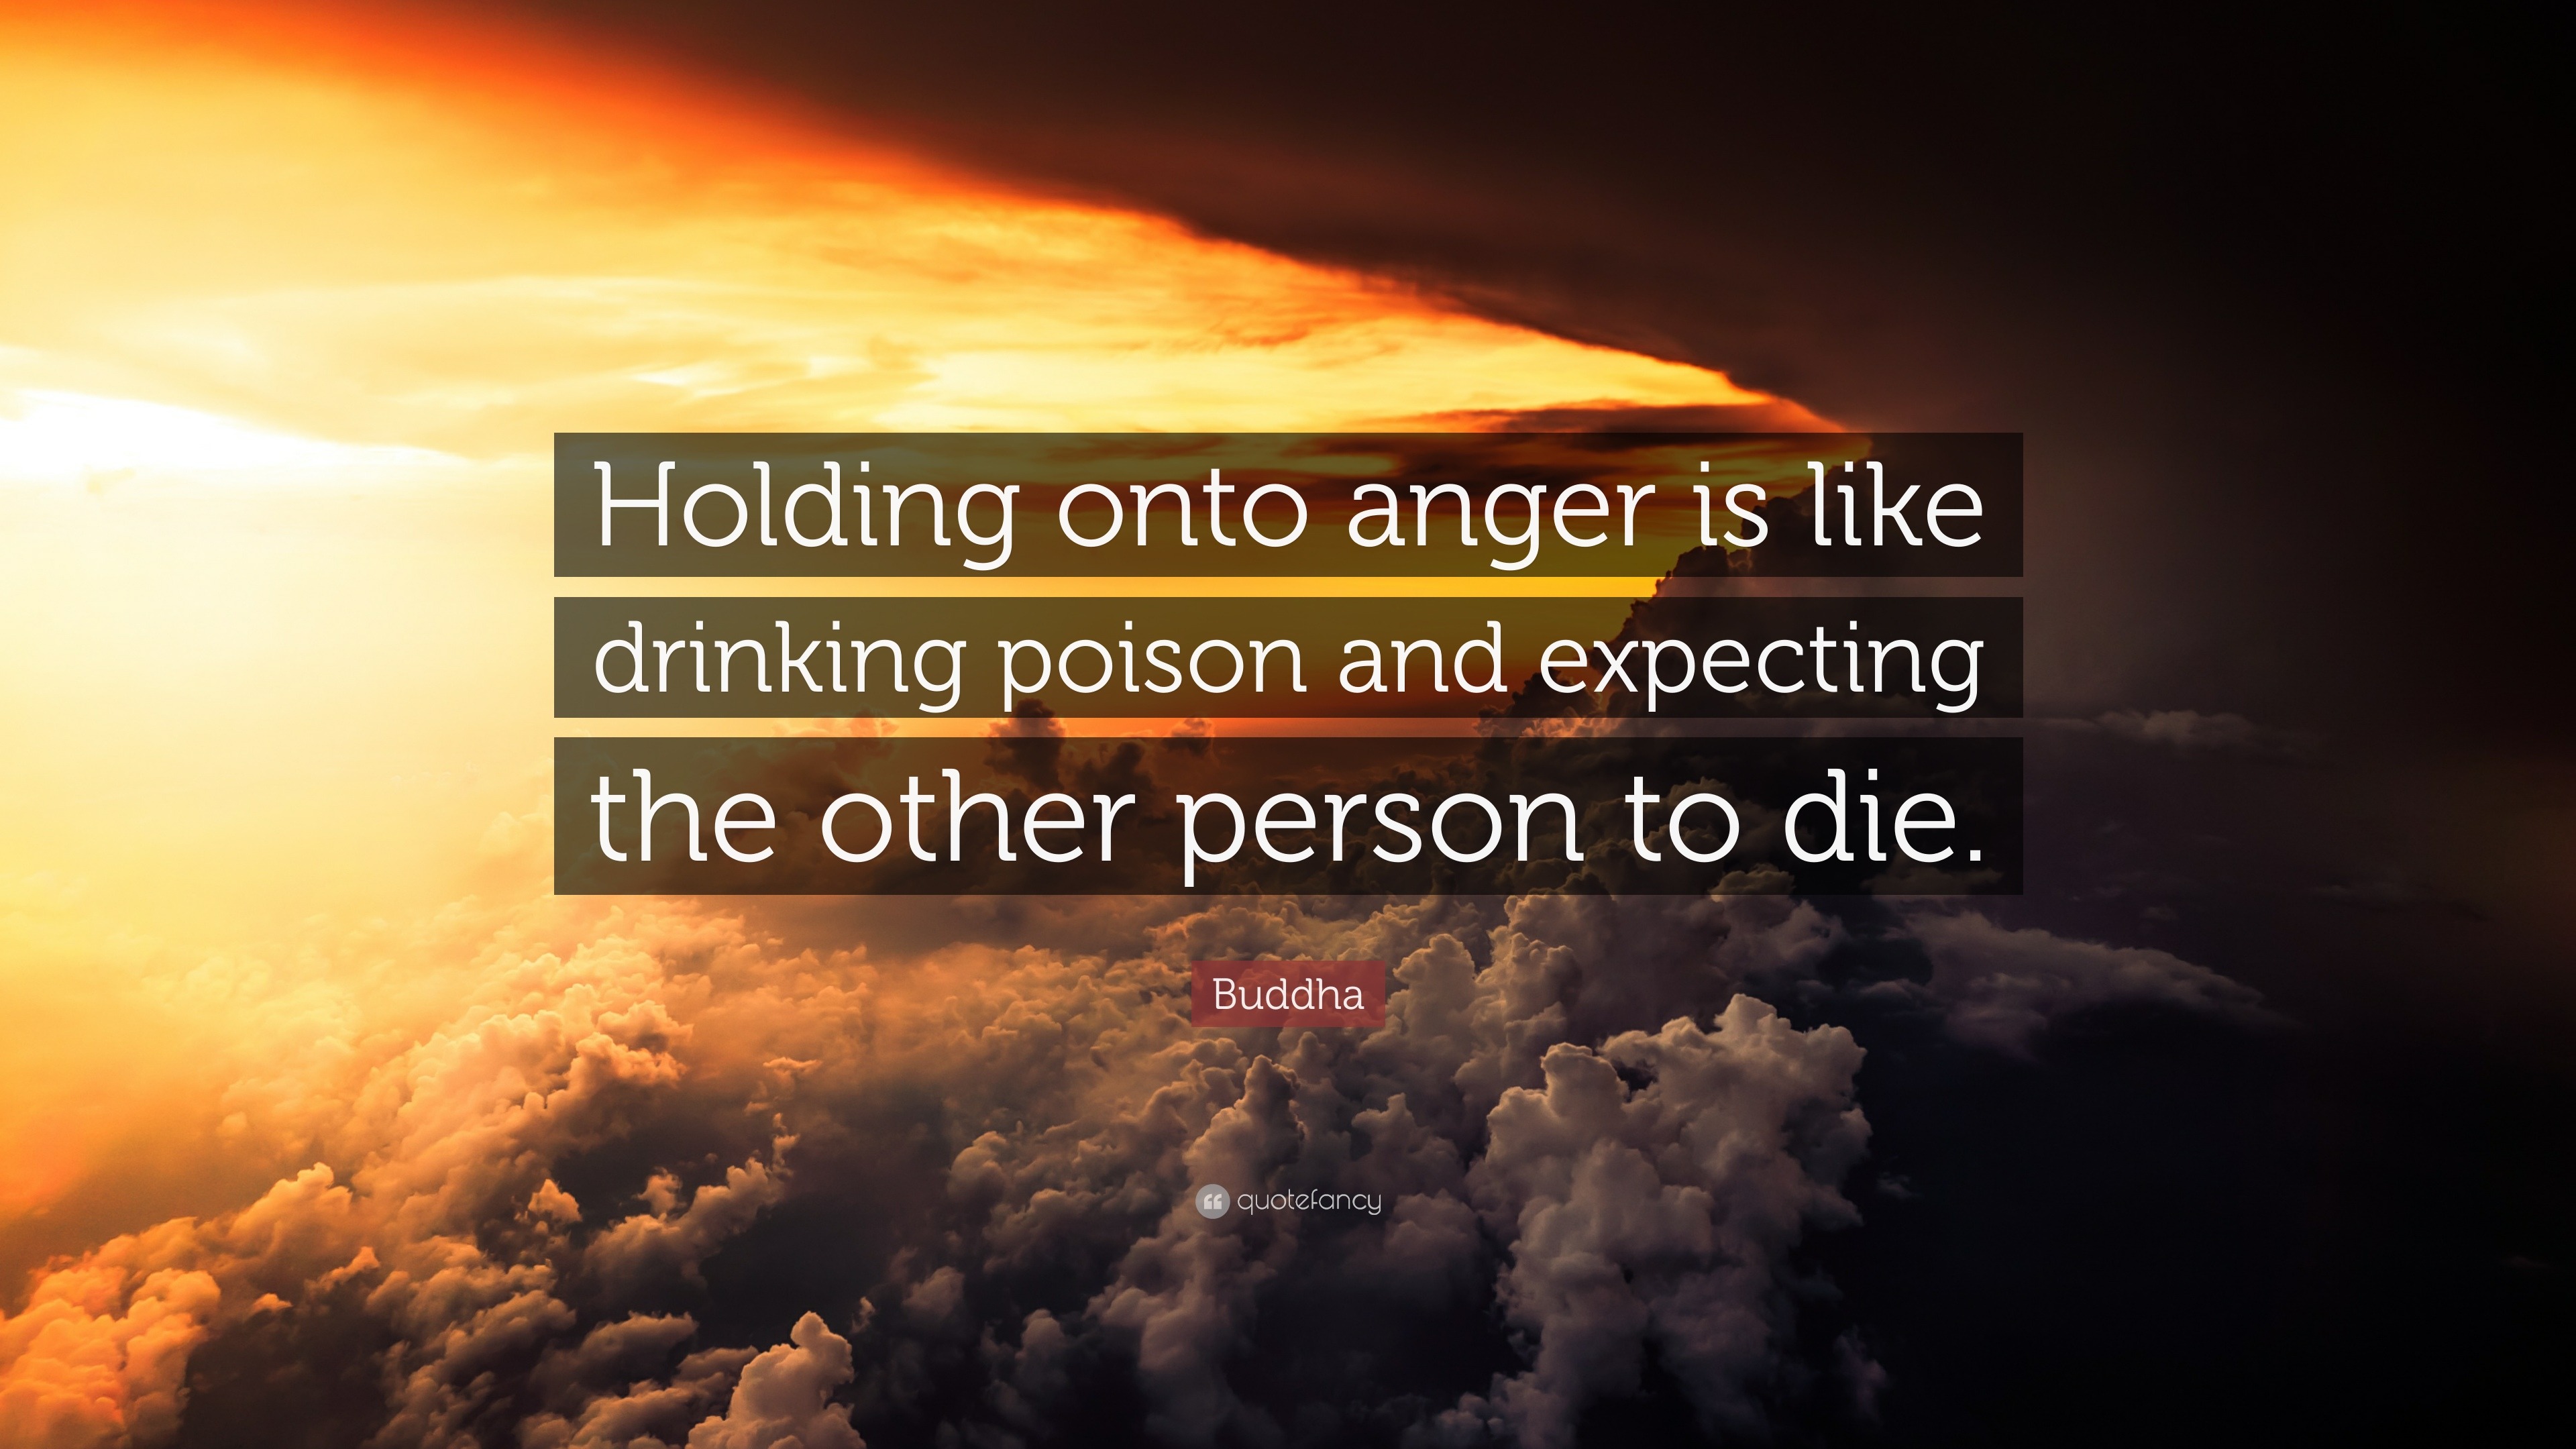 Buddha Quote: “Holding onto anger is like drinking poison and expecting